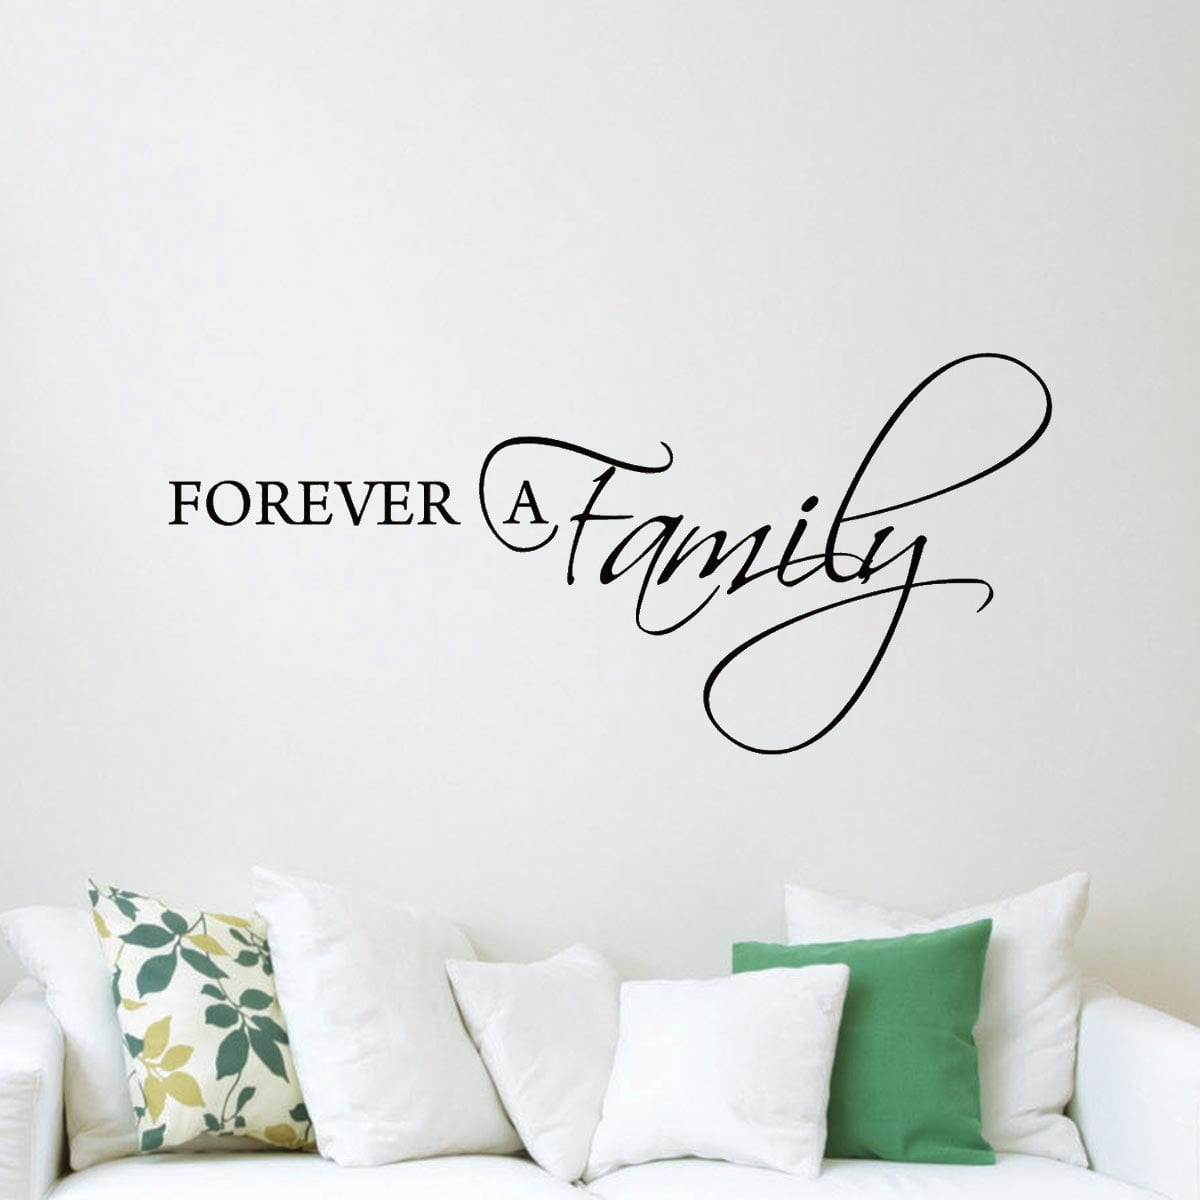 Design with Vinyl Moti 2284 1 Decal Black Size 8 Inches x 20 Inches Peel & Stick Wall Sticker Family Text Lettering Quote Bedroom Living Room Color 